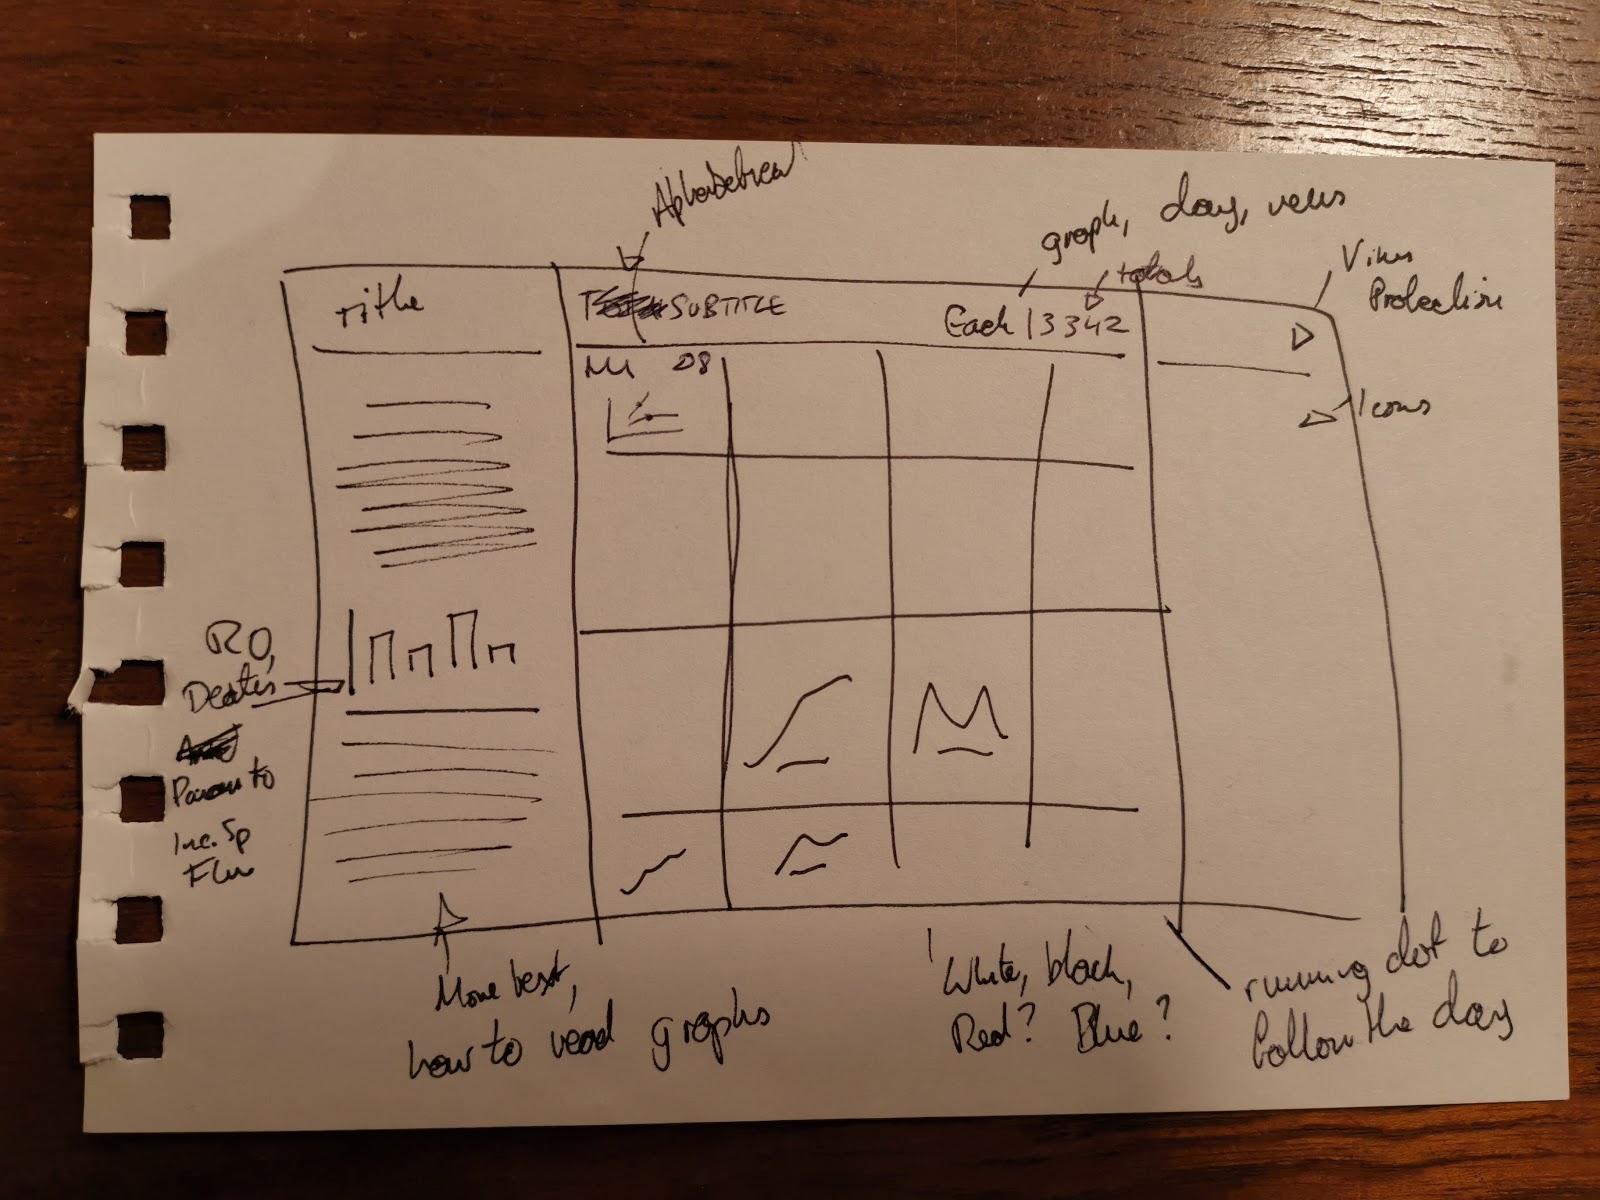 An image of a note with a hand drawn dashboard plan on it, featuring many boxes and written annotations.